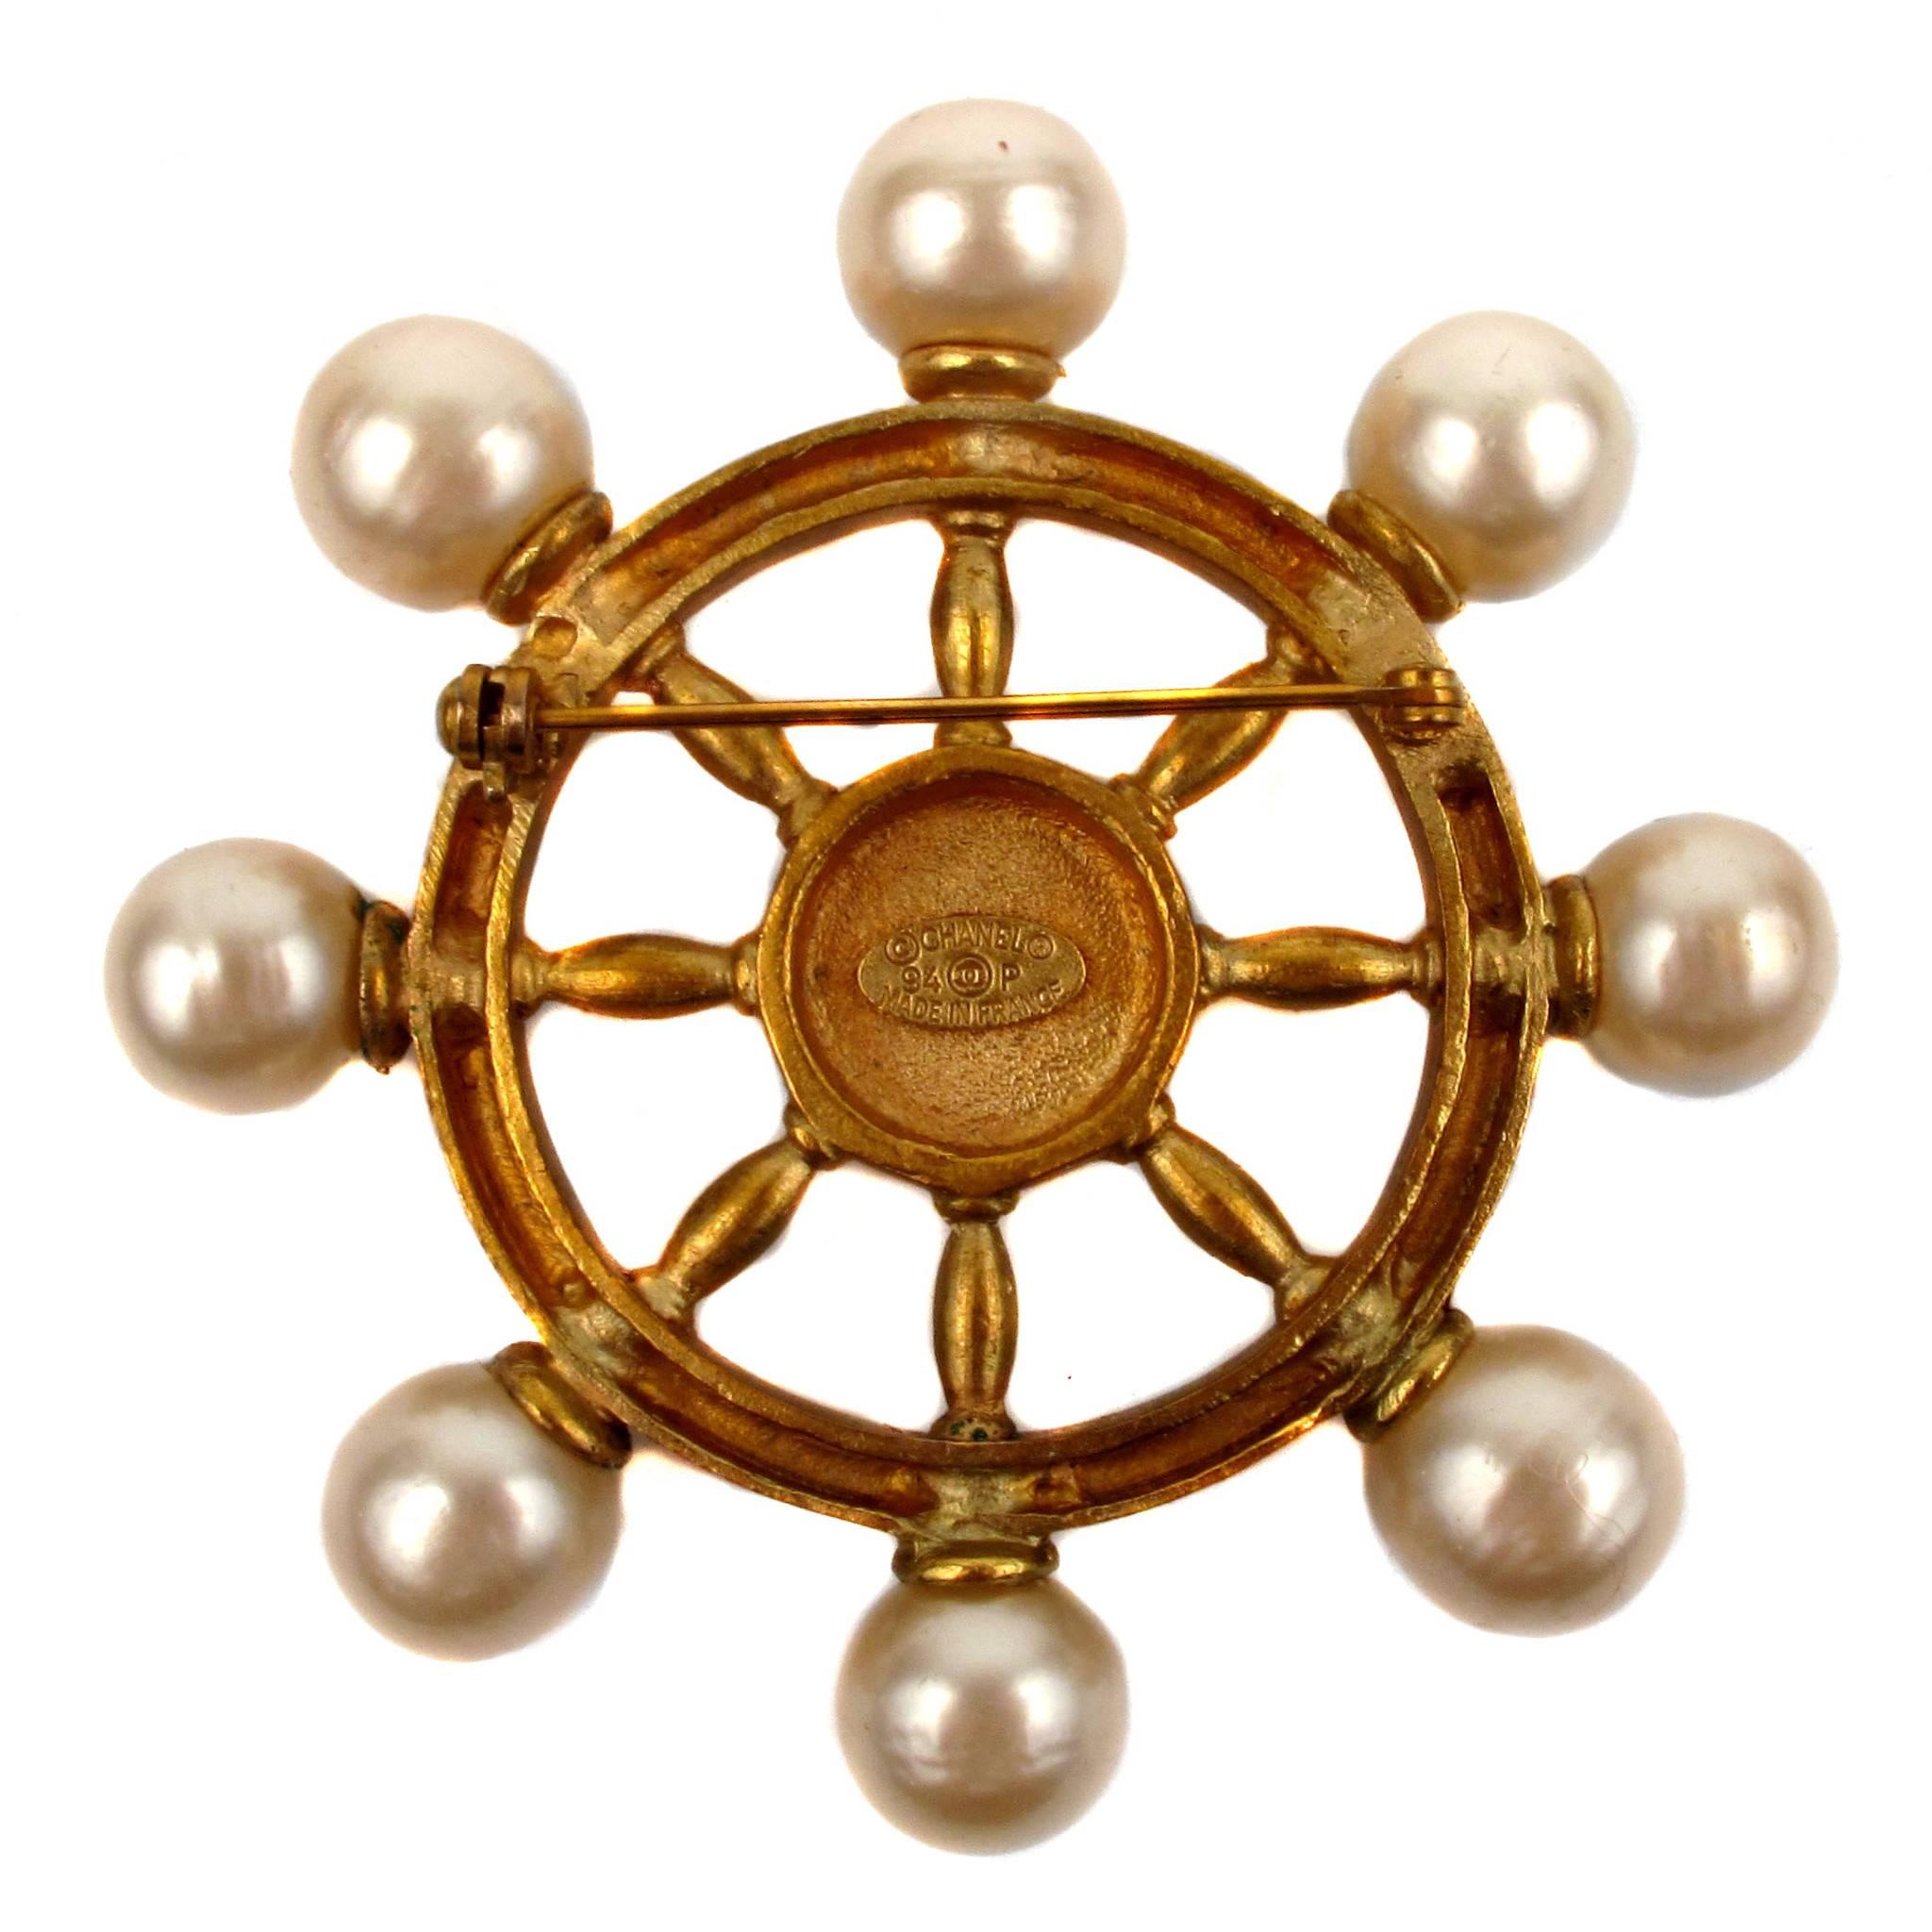 Chanel 1994 Spring Ship Wheel Brooch may be worn a myriad of ways...on a lapel, at the waist, or even as a final flourish to a tied scarf!  Pin features gold tone hardware, pearls, and the inimitable double 